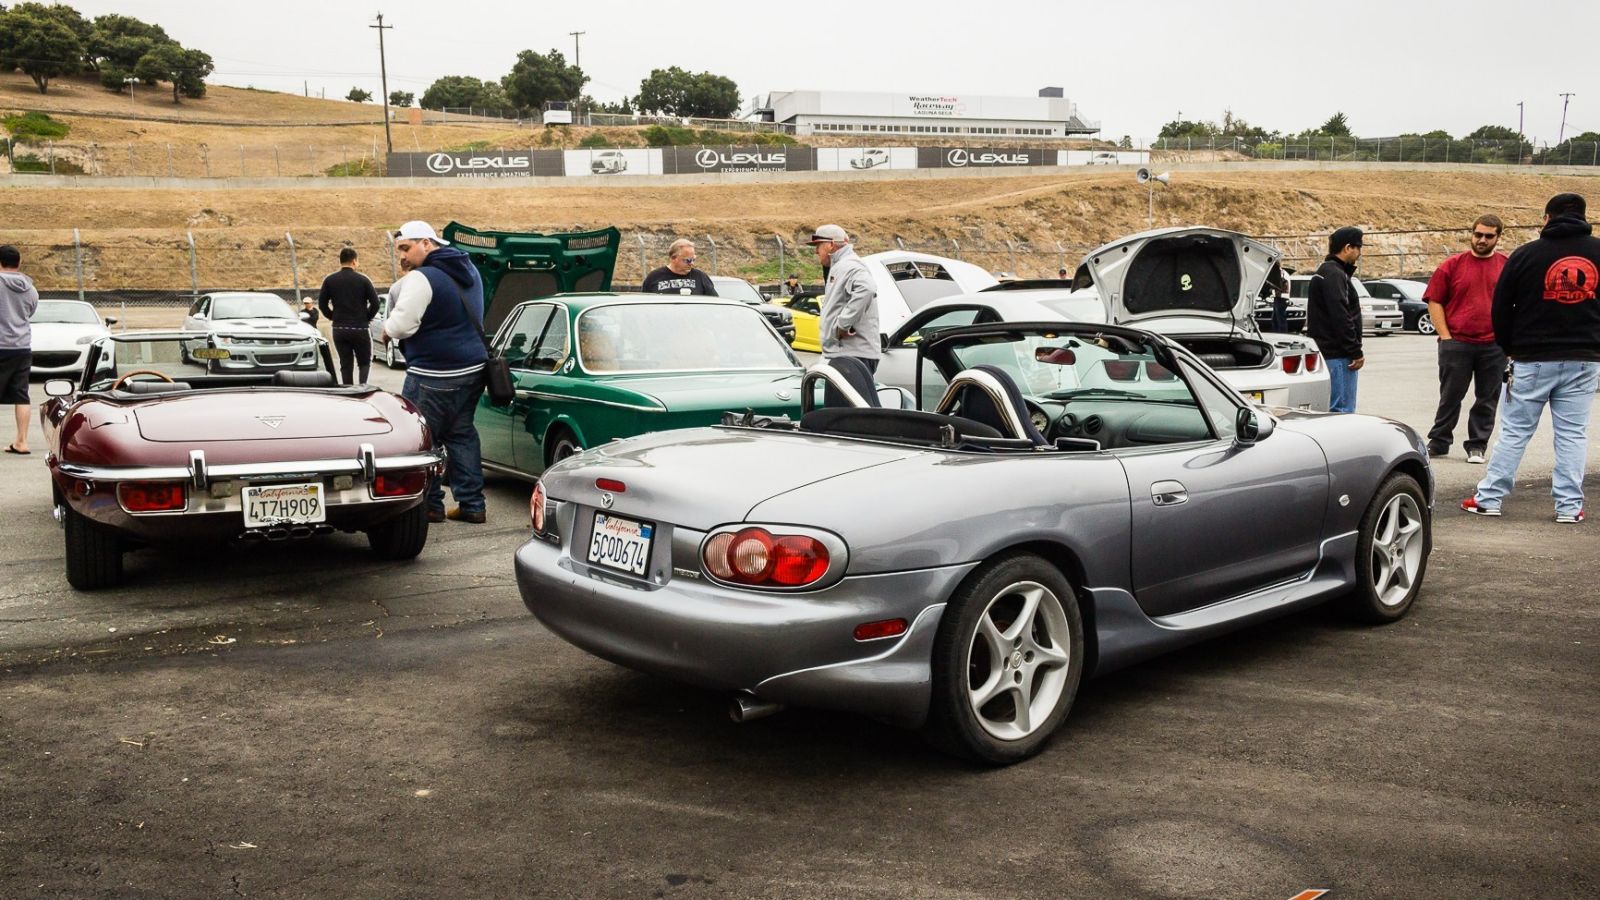 Illustration for article titled Photos from the July 20th Laguna Seca Cars and Coffee